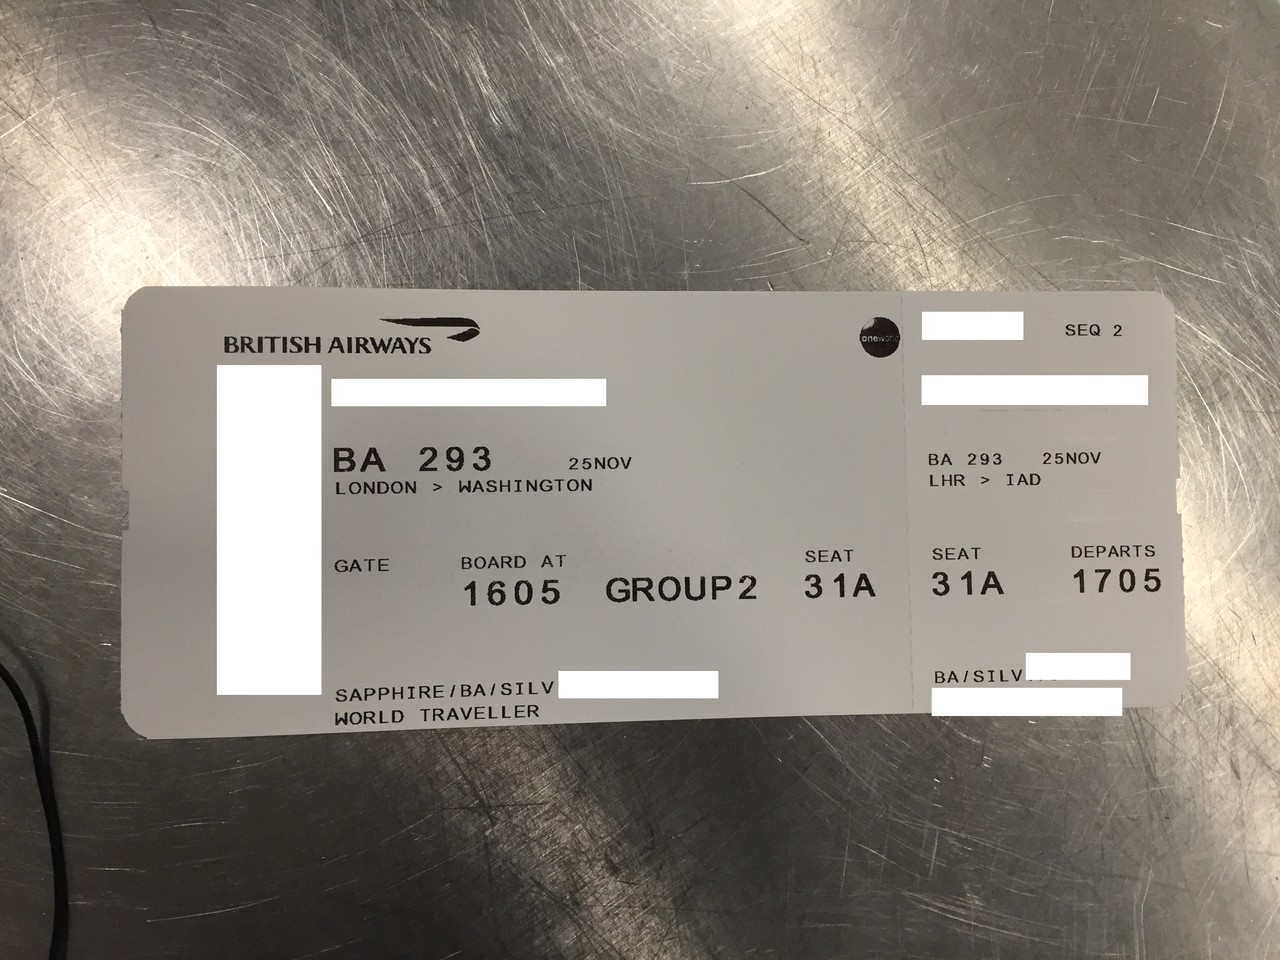 Review of British Airways flight from London to Washington in Economy